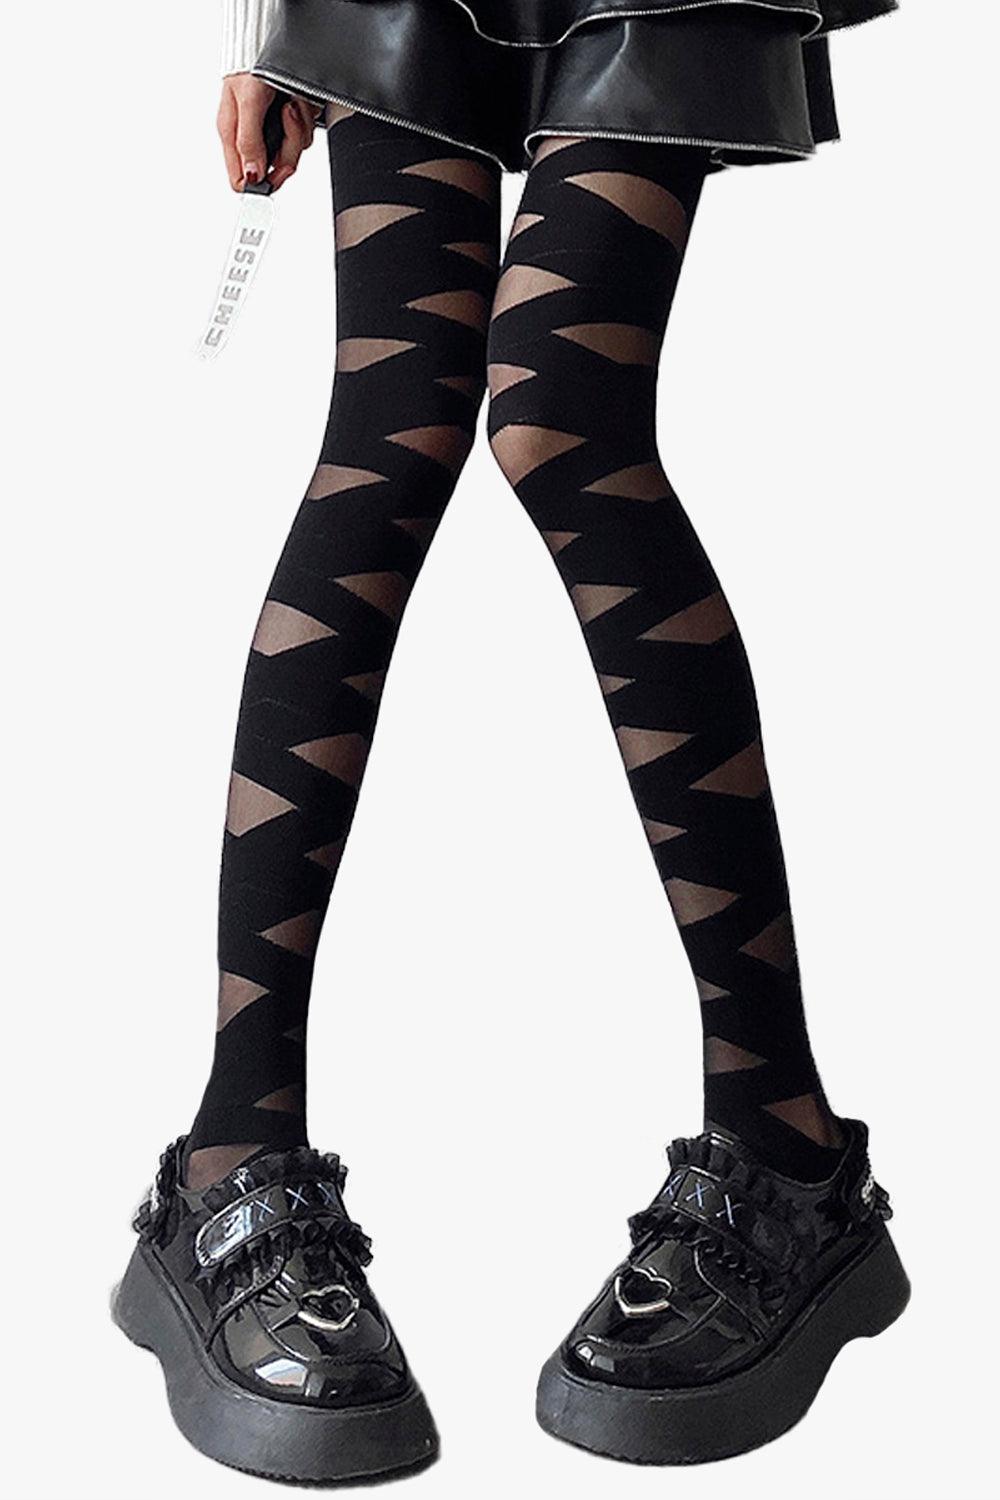 Lace Cross Bandaged Aesthetic Tights - Aesthetic Clothes Shop